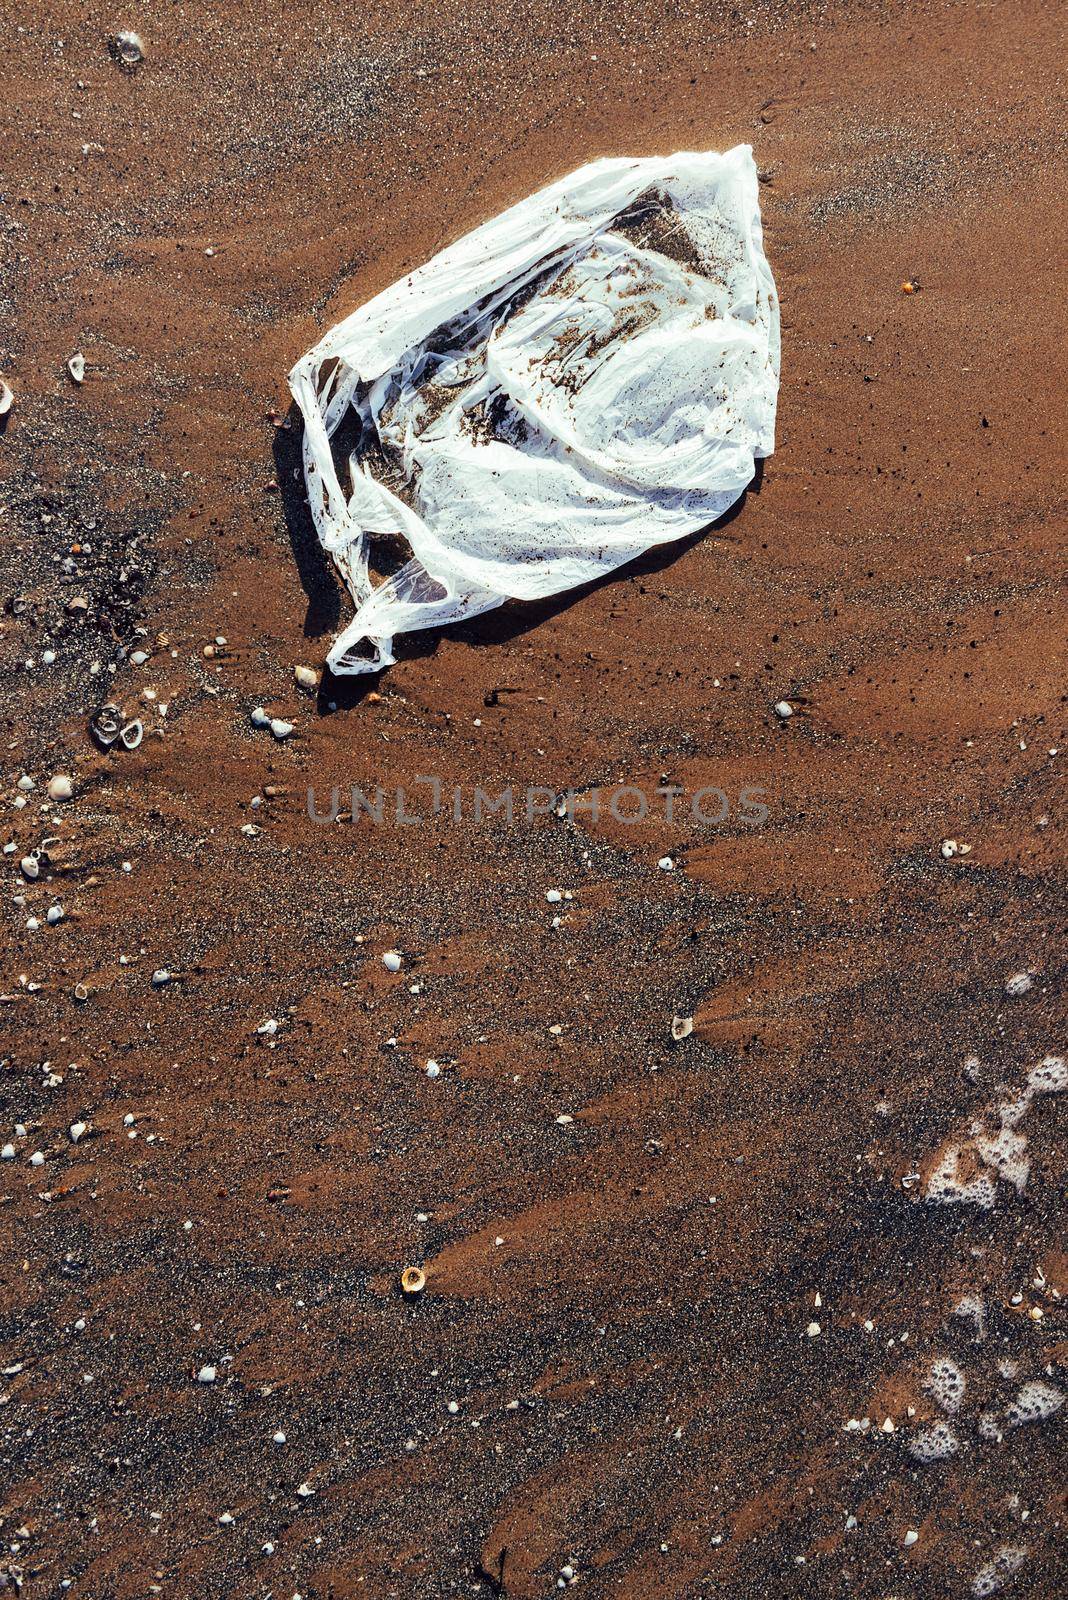 plastic bag contaminating the beach, seashore and water pollution with plastics concept, trash at the seaside, top view of an environmental problem